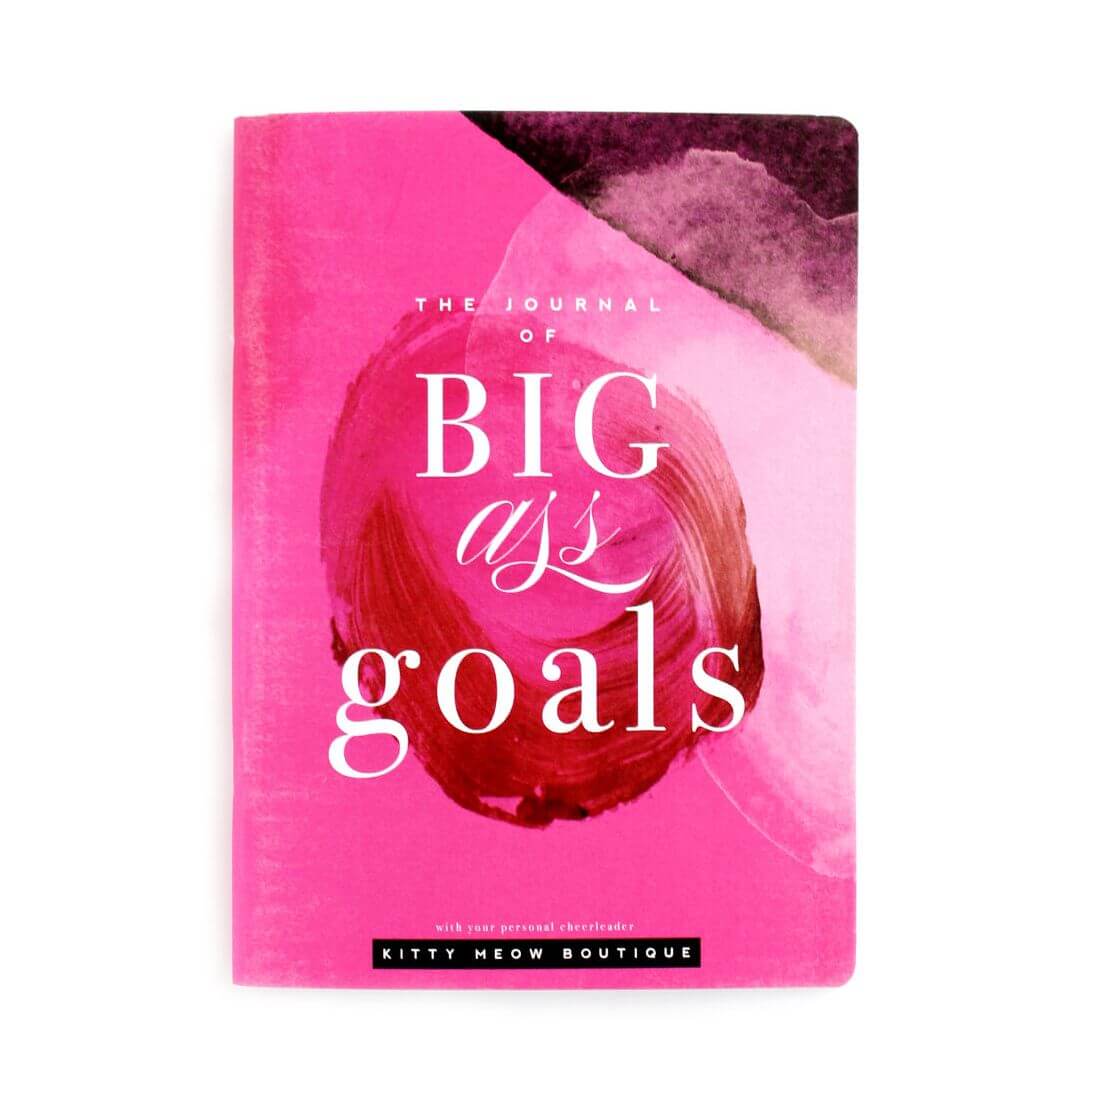 Kitty Meow Boutique The Journal of Big Ass Goals Notebook Notebooks & Notepads Kitty Meow Boutique